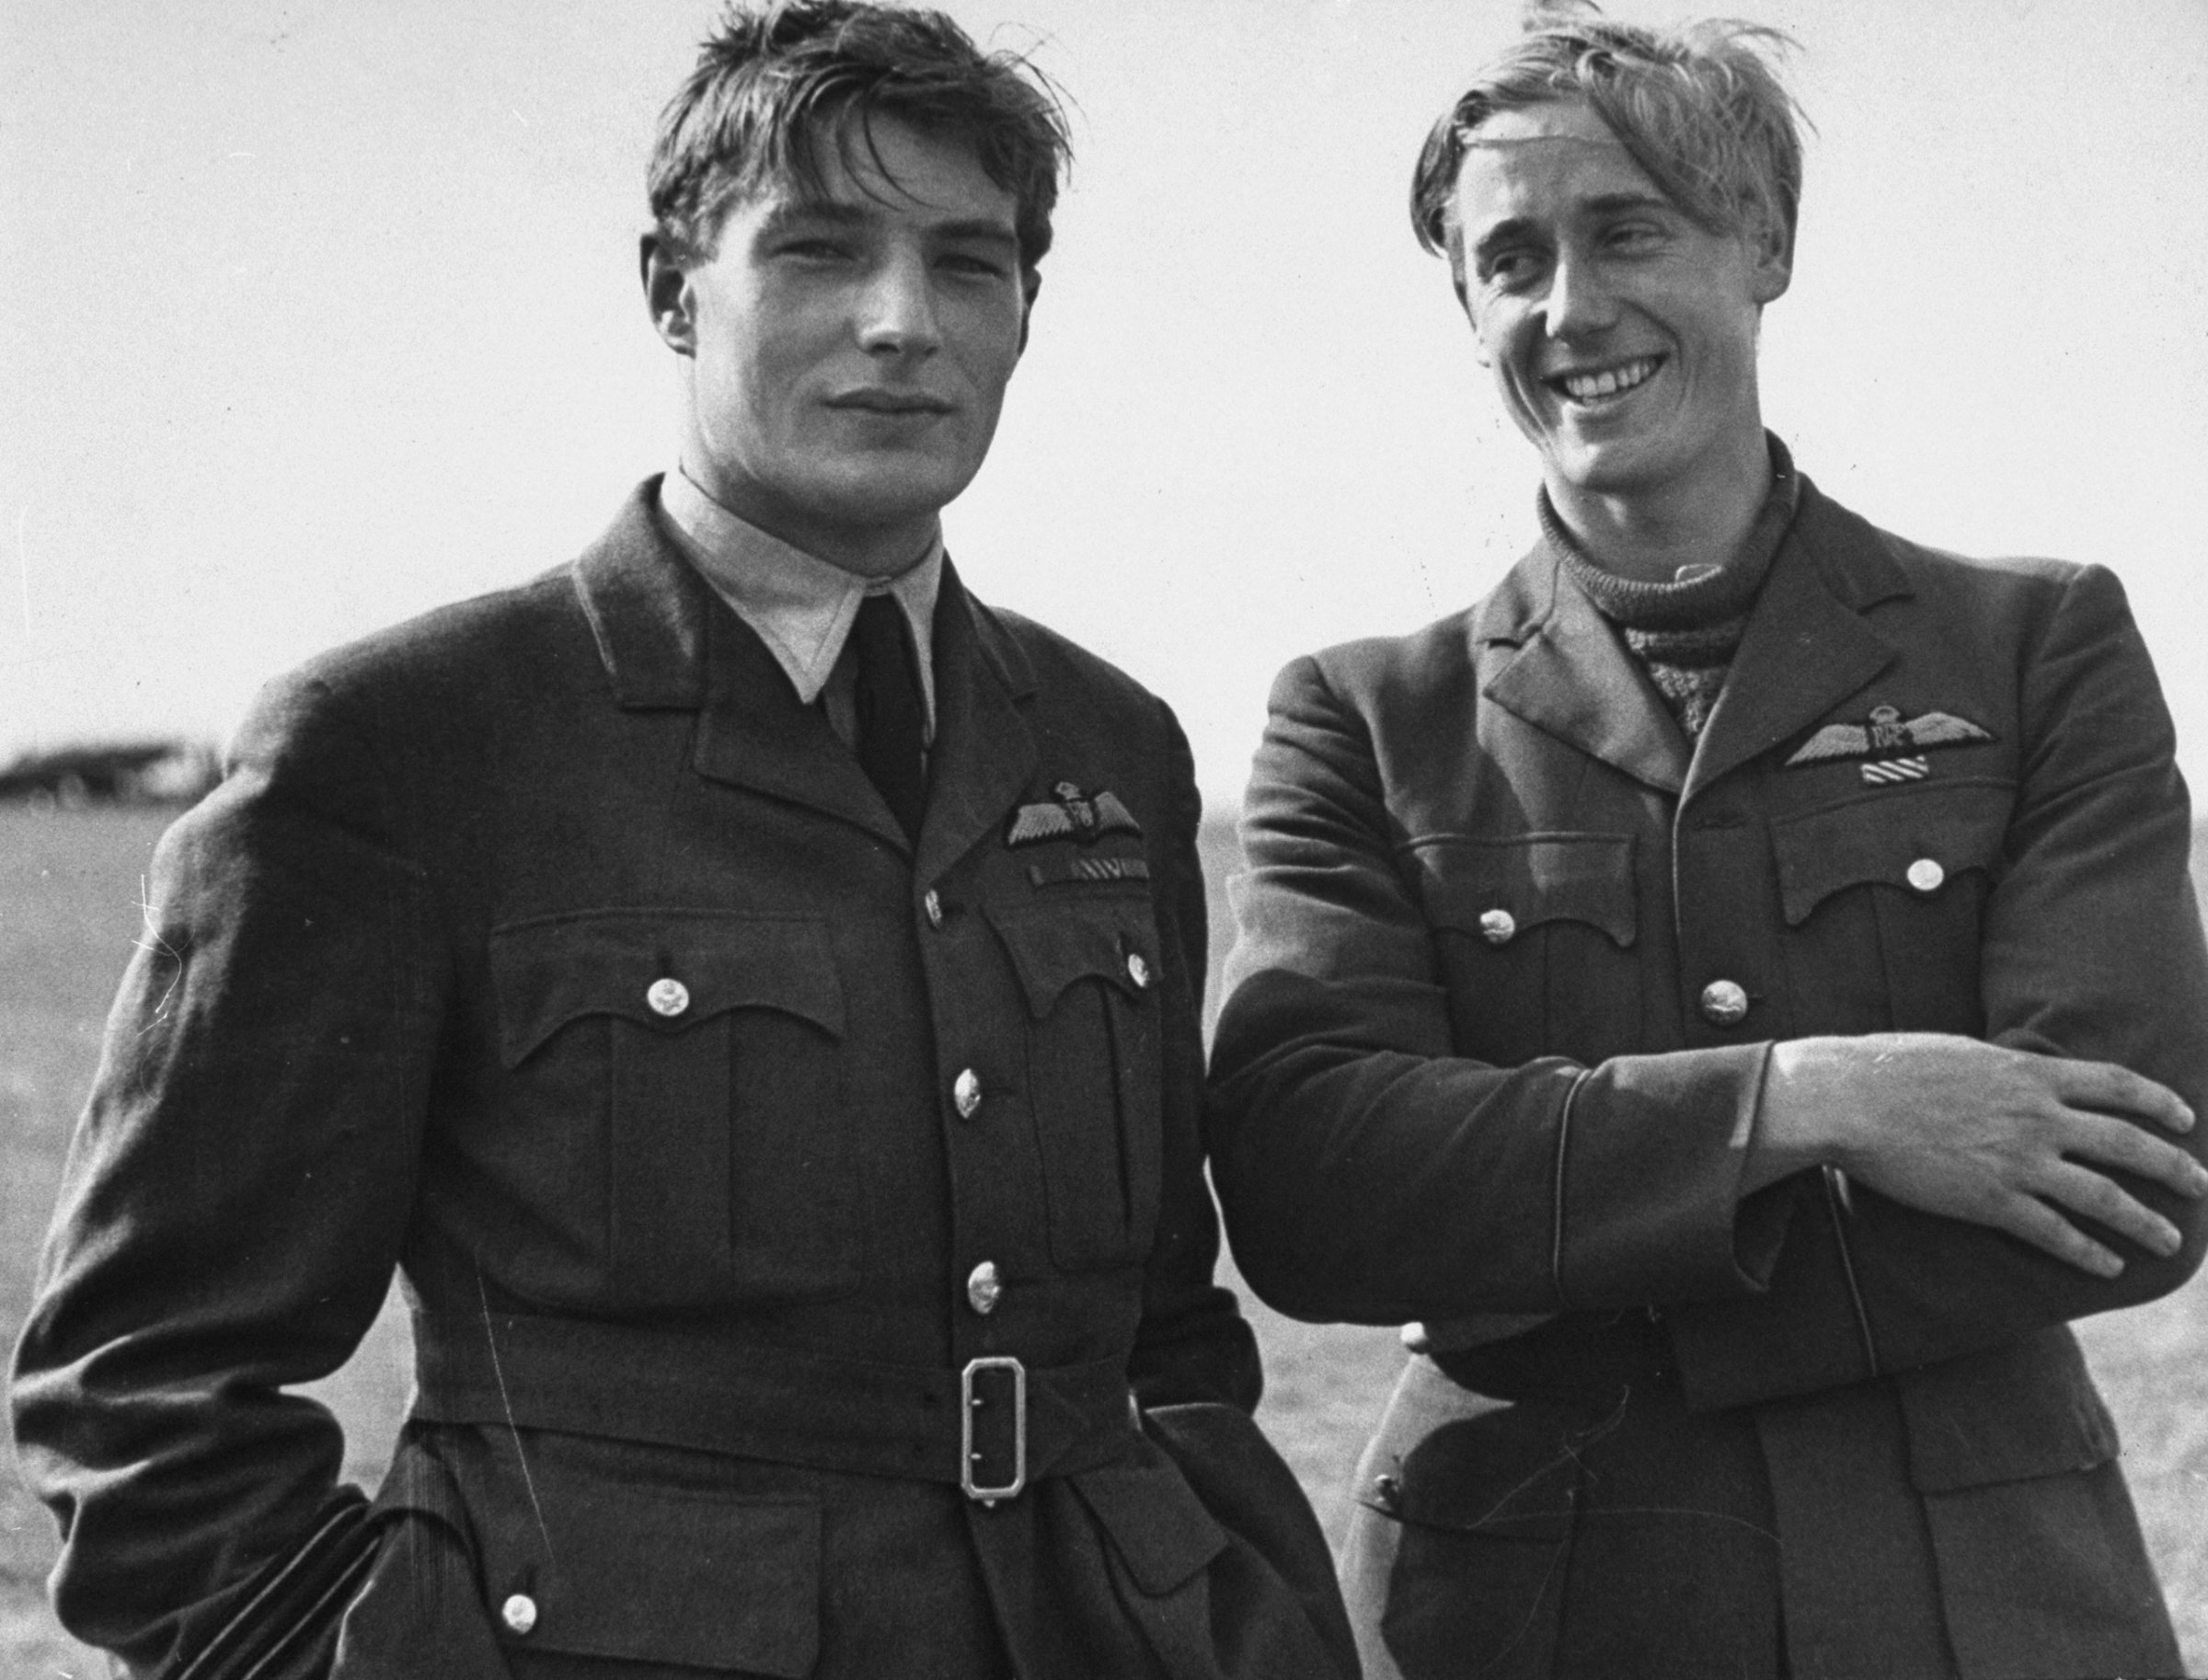 Two pilots (Flying Officer Albert Gerald Lewis on right, unidentified flyer at left) between flights during the Battle of Britain, RAF Fighter Command airfield, 1940.